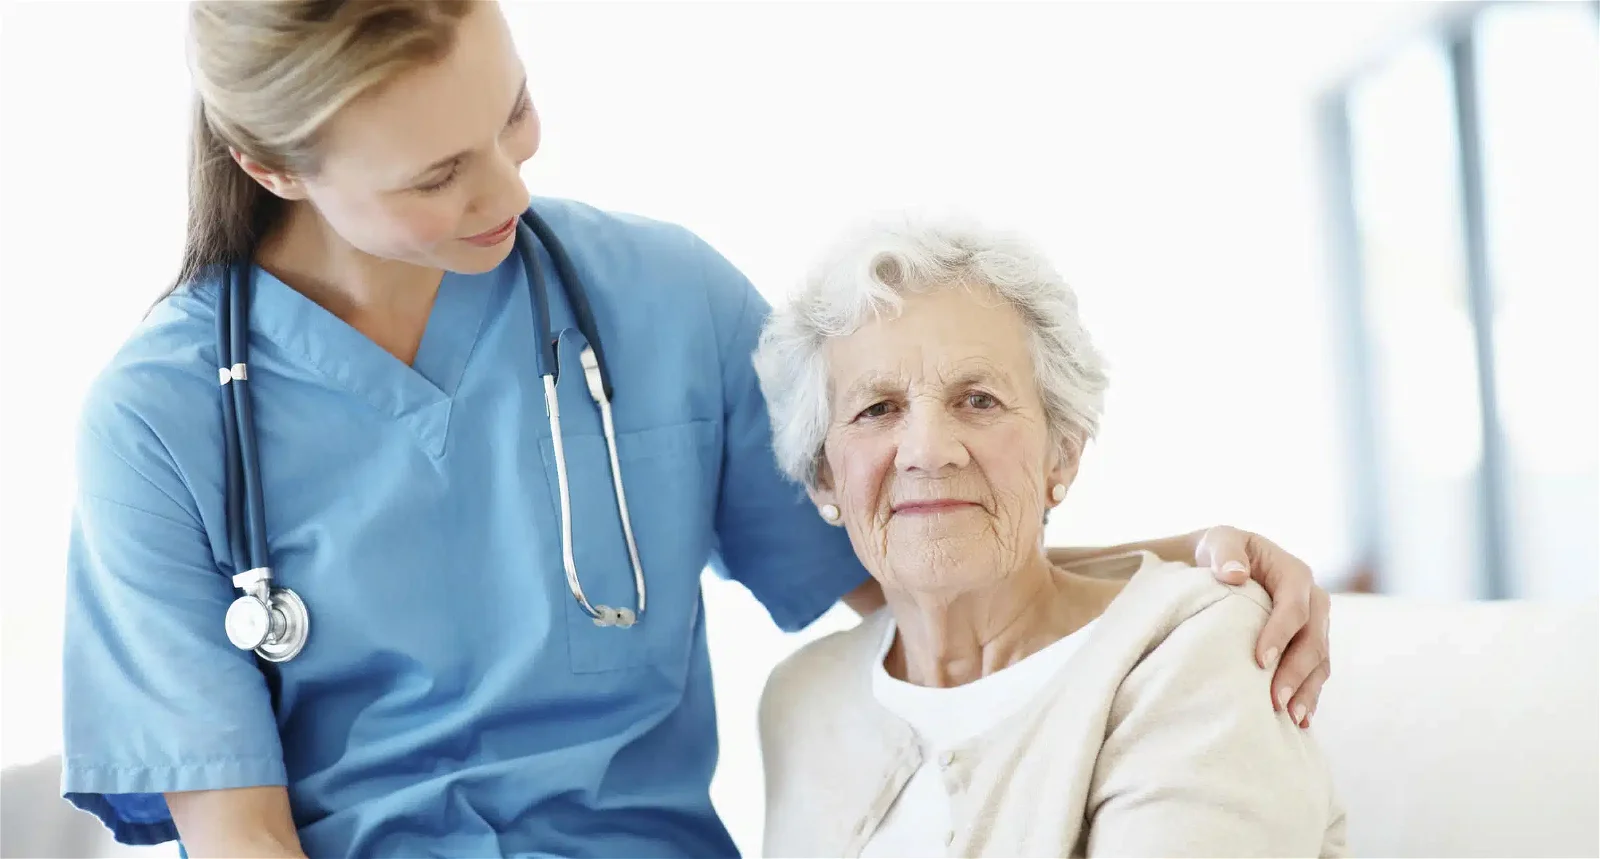 A healthcare worker in blue scrubs with a stethoscope reassures an elderly woman with gray hair, who is wearing a beige cardigan.